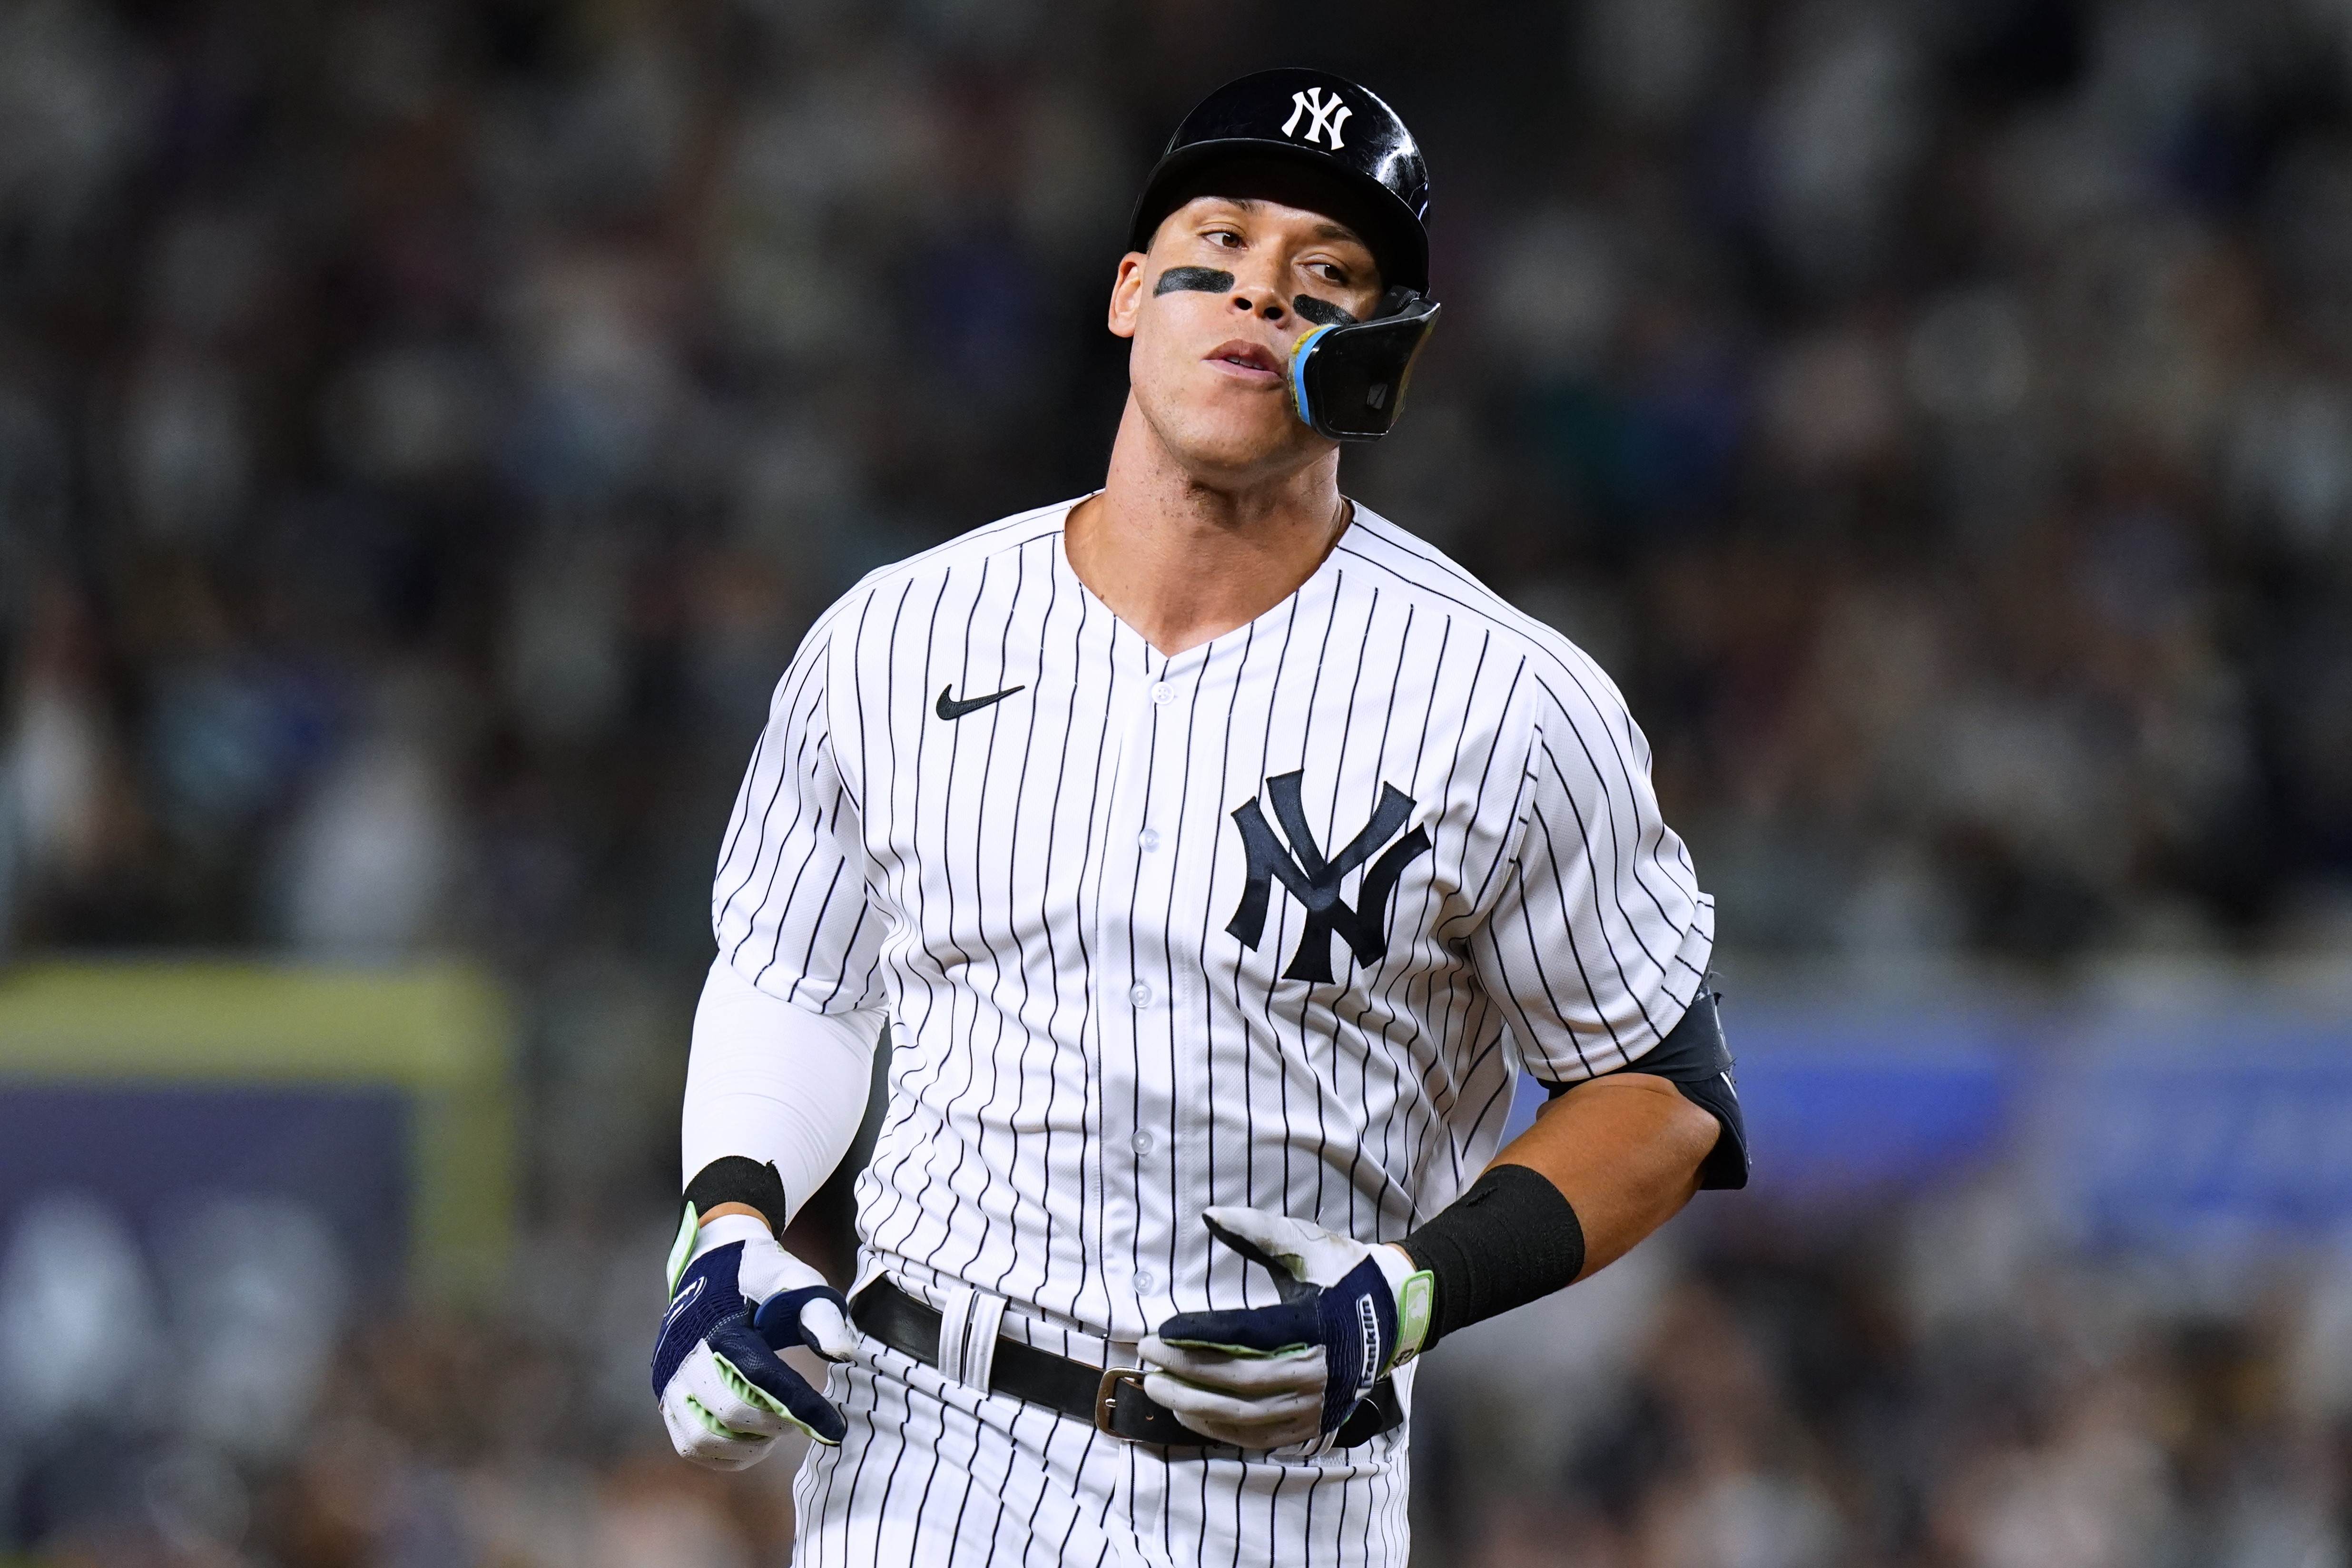 Aaron Judge Gives Yankees Walk-Off Win Over Astros - The New York